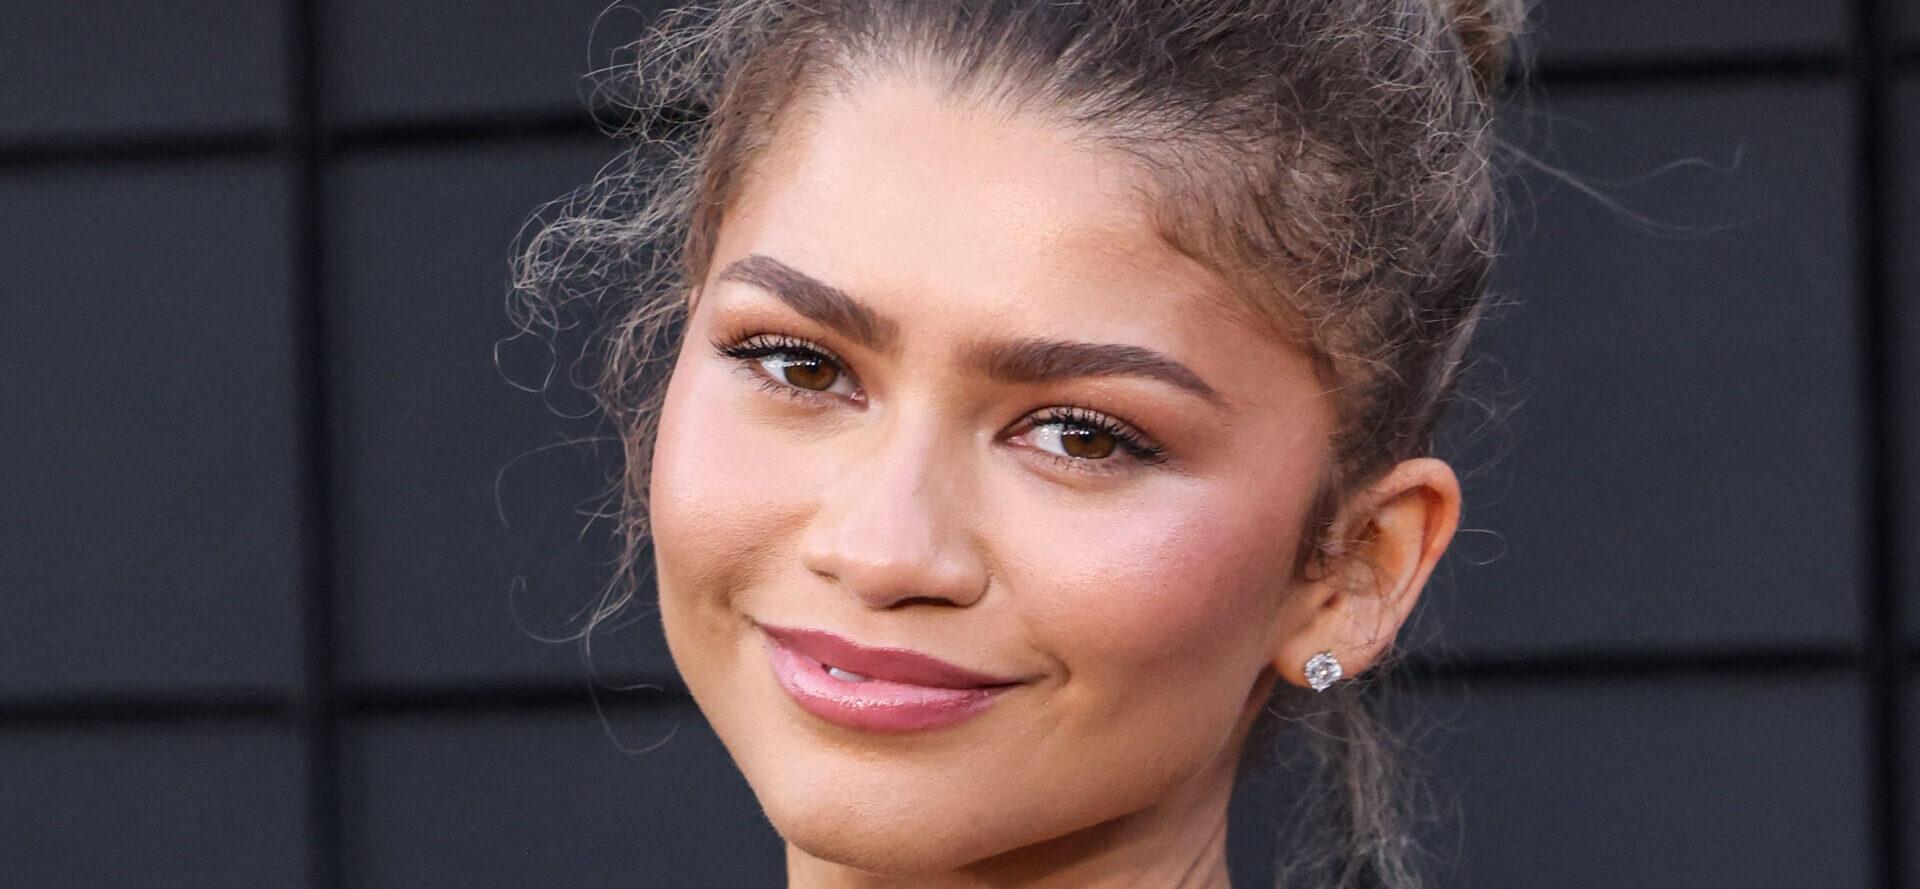 Zendaya’s ‘Challengers’ Already Receiving Oscars Buzz With $6.2M Opening At Box Office